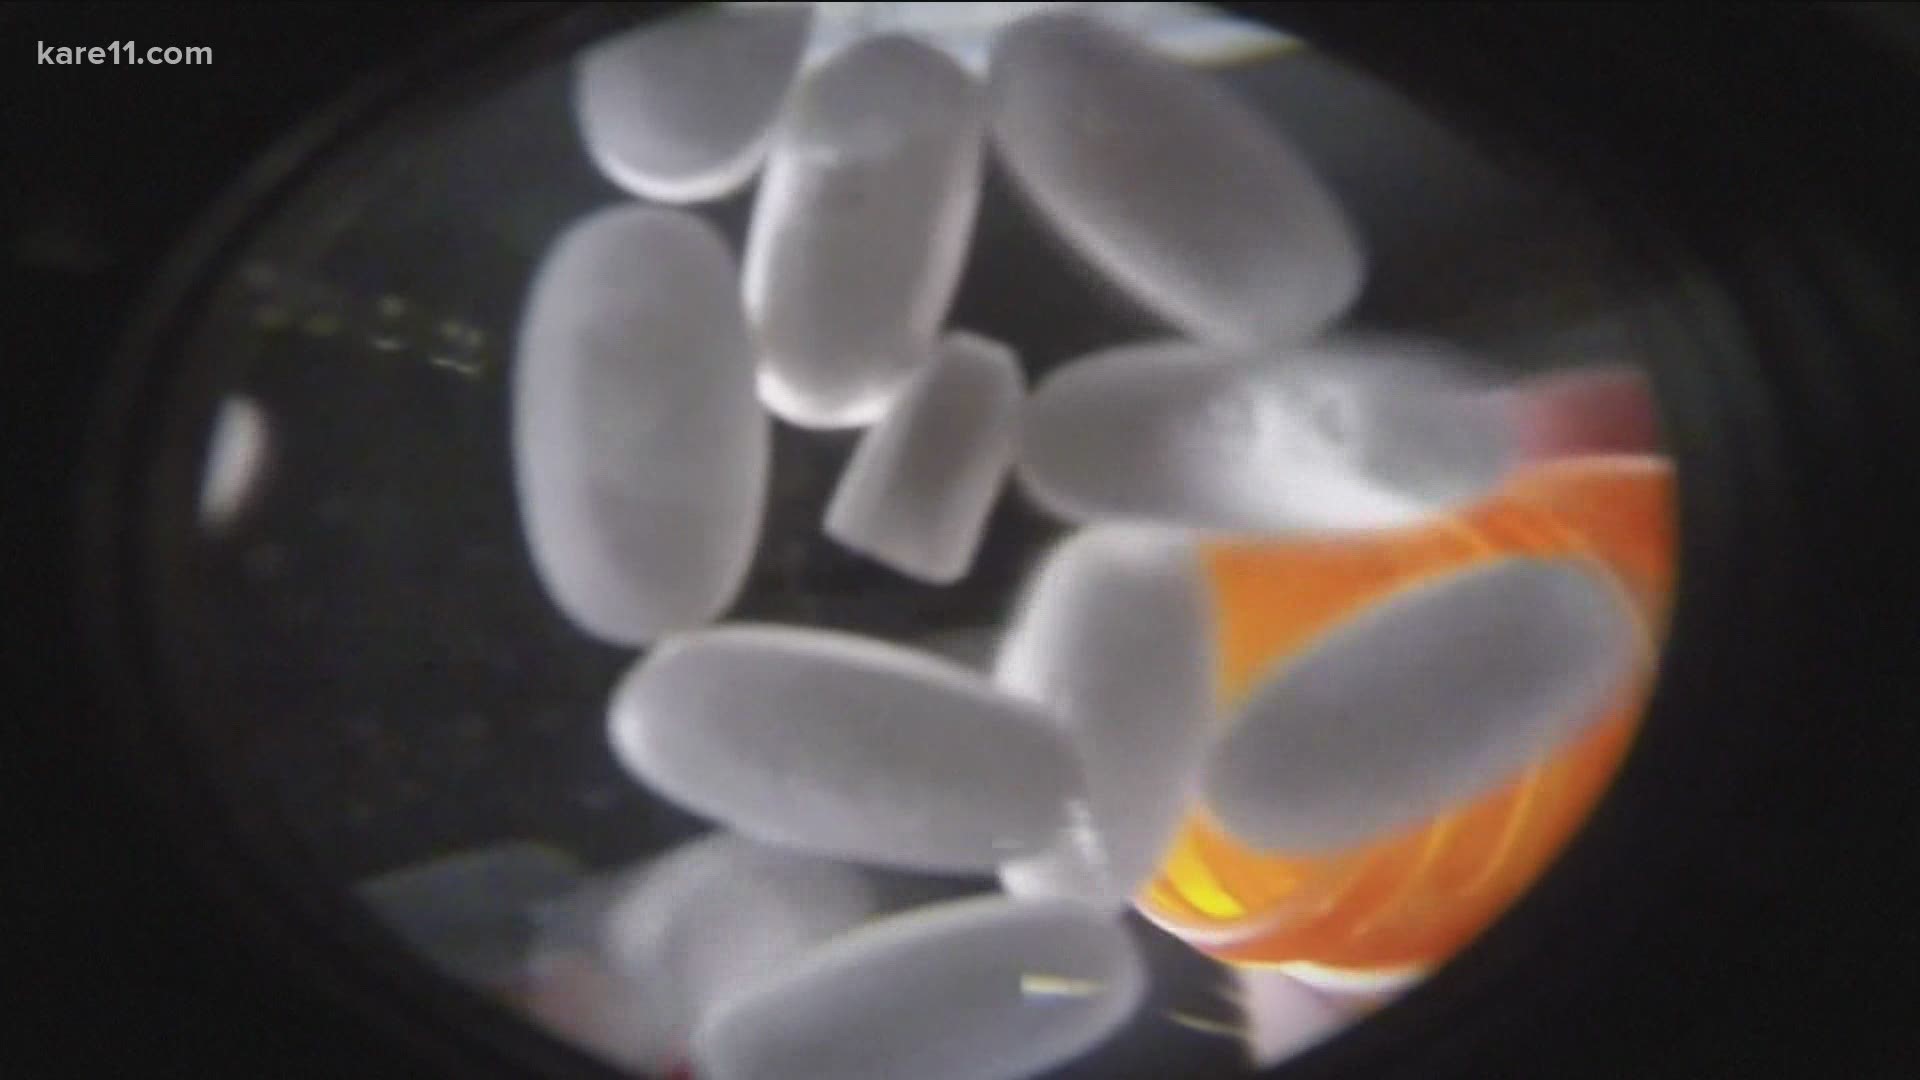 This Minnetonka-based company can help you safely dispose of drugs.